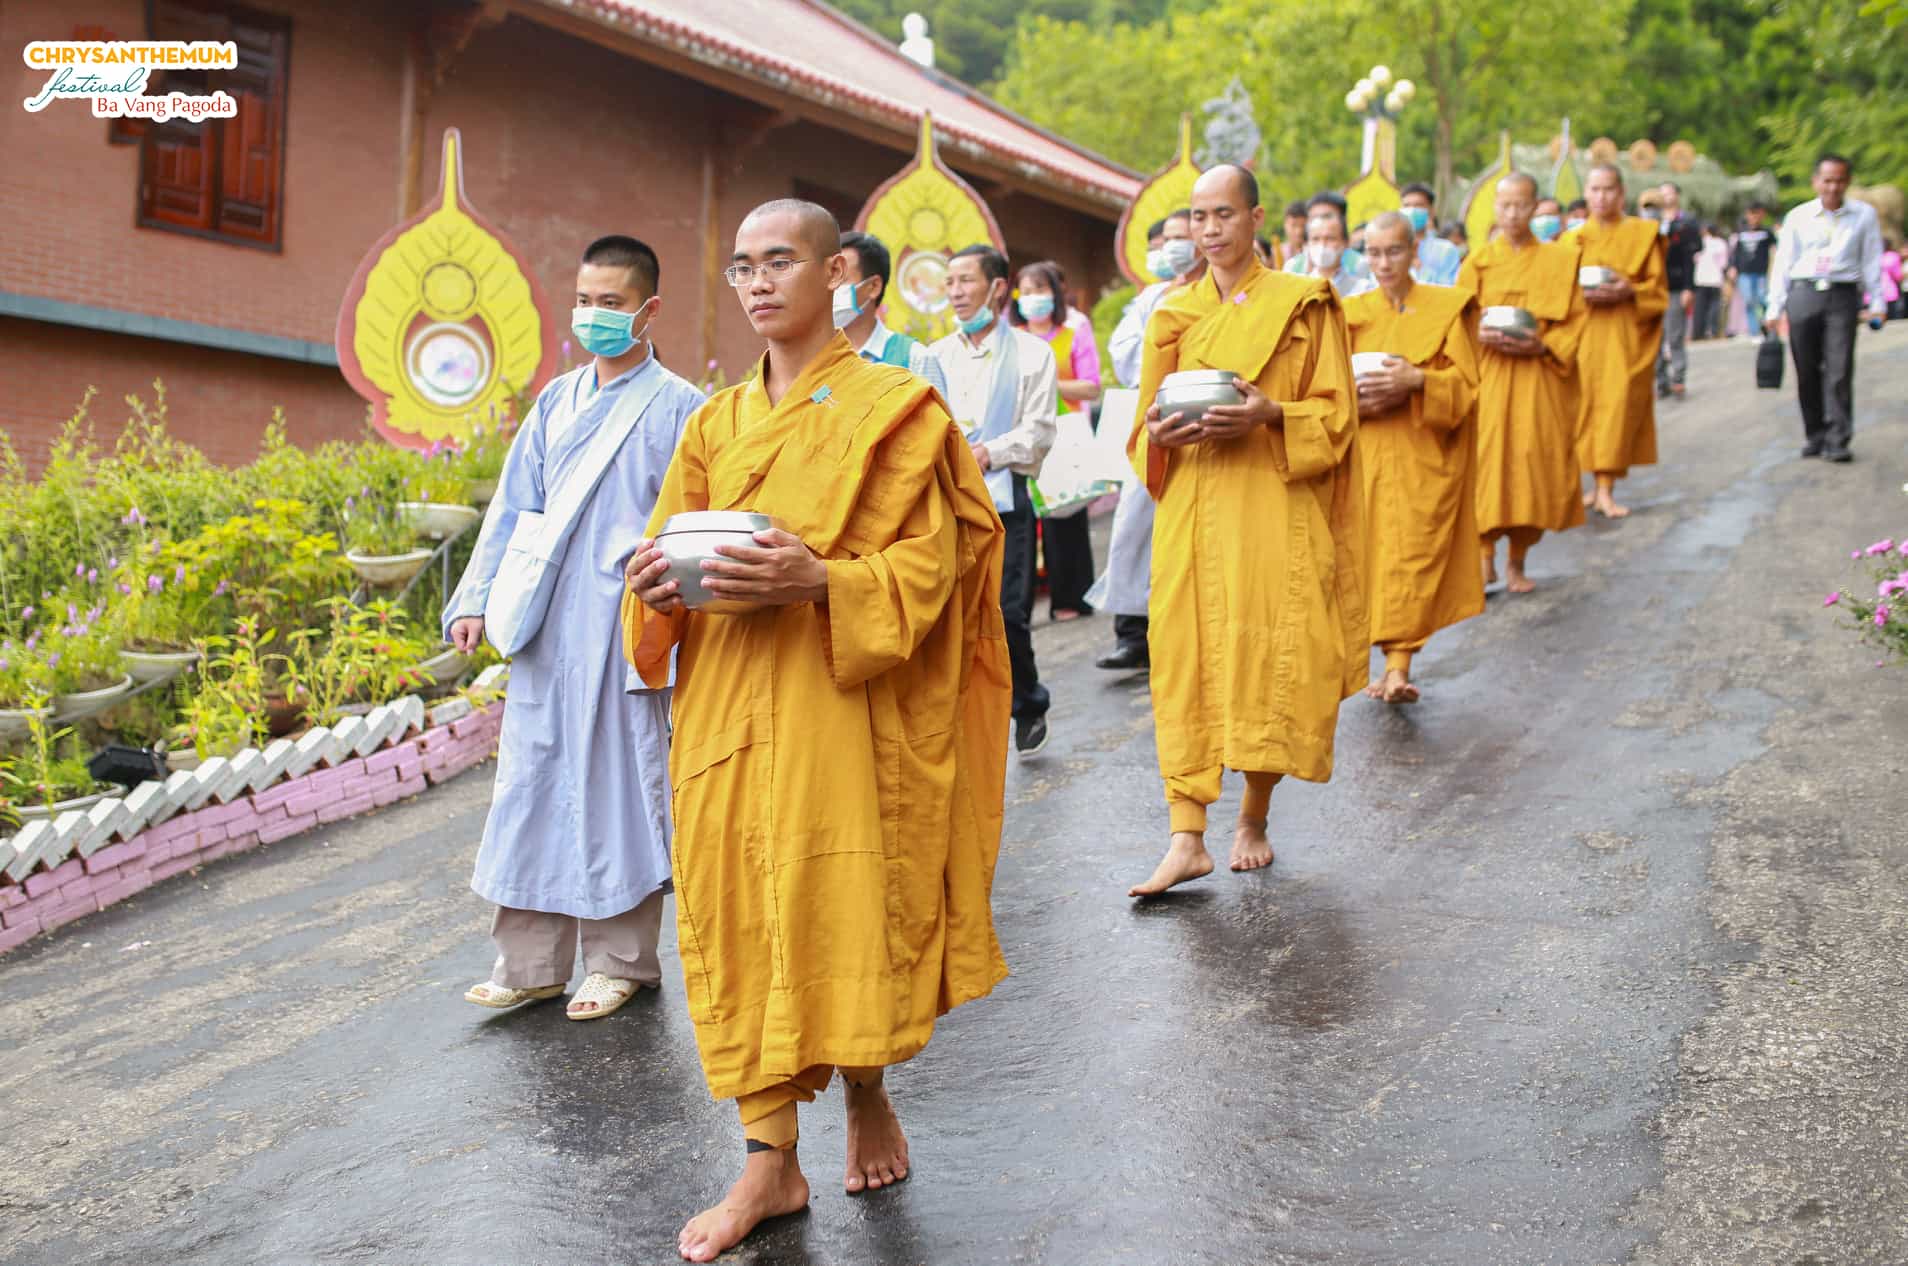 monks-walking-mindfully-on-their-alms-round-in-the-campus-of-ba-vang-pagoda